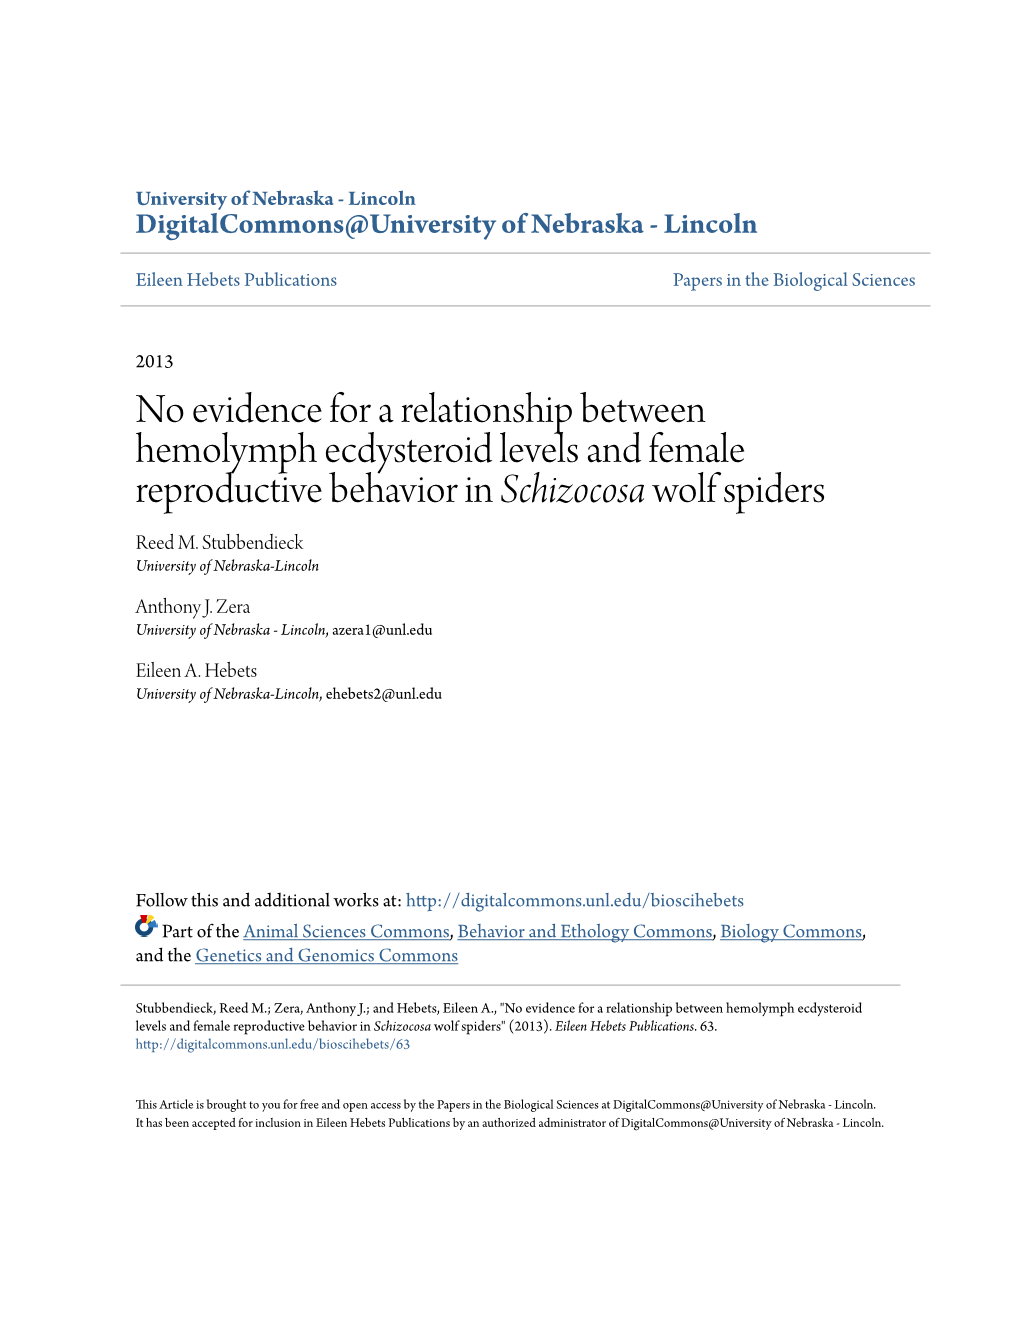 No Evidence for a Relationship Between Hemolymph Ecdysteroid Levels and Female Reproductive Behavior in Schizocosa Wolf Spiders Reed M